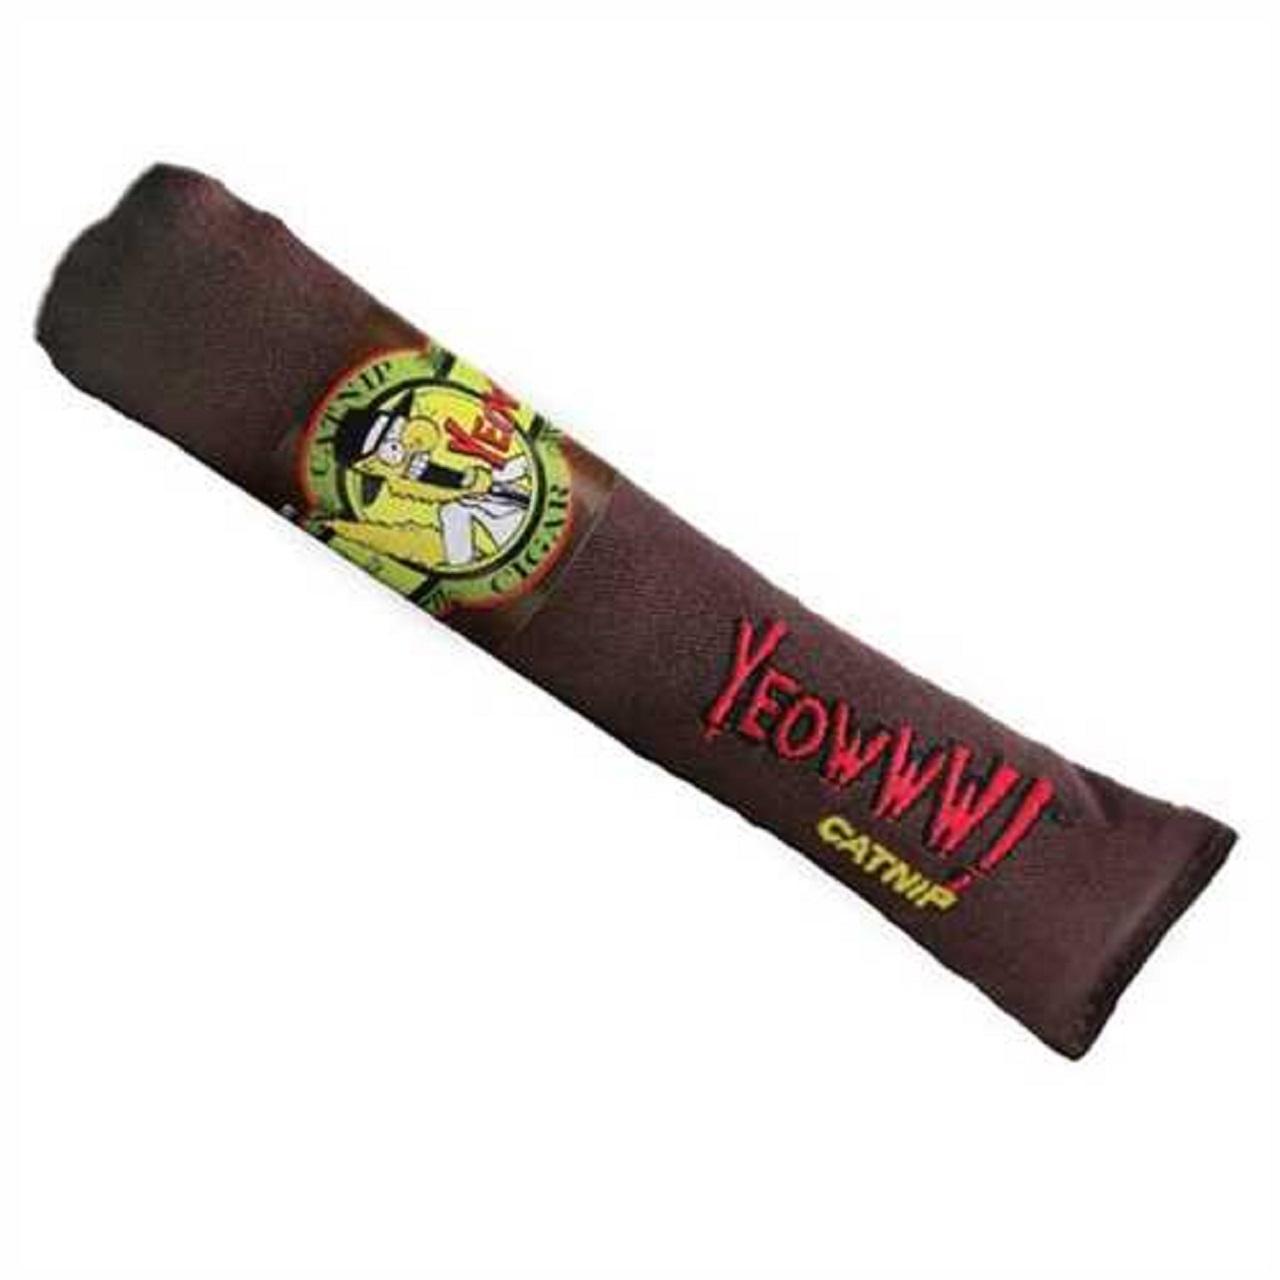 An image of Yeowww Cigar